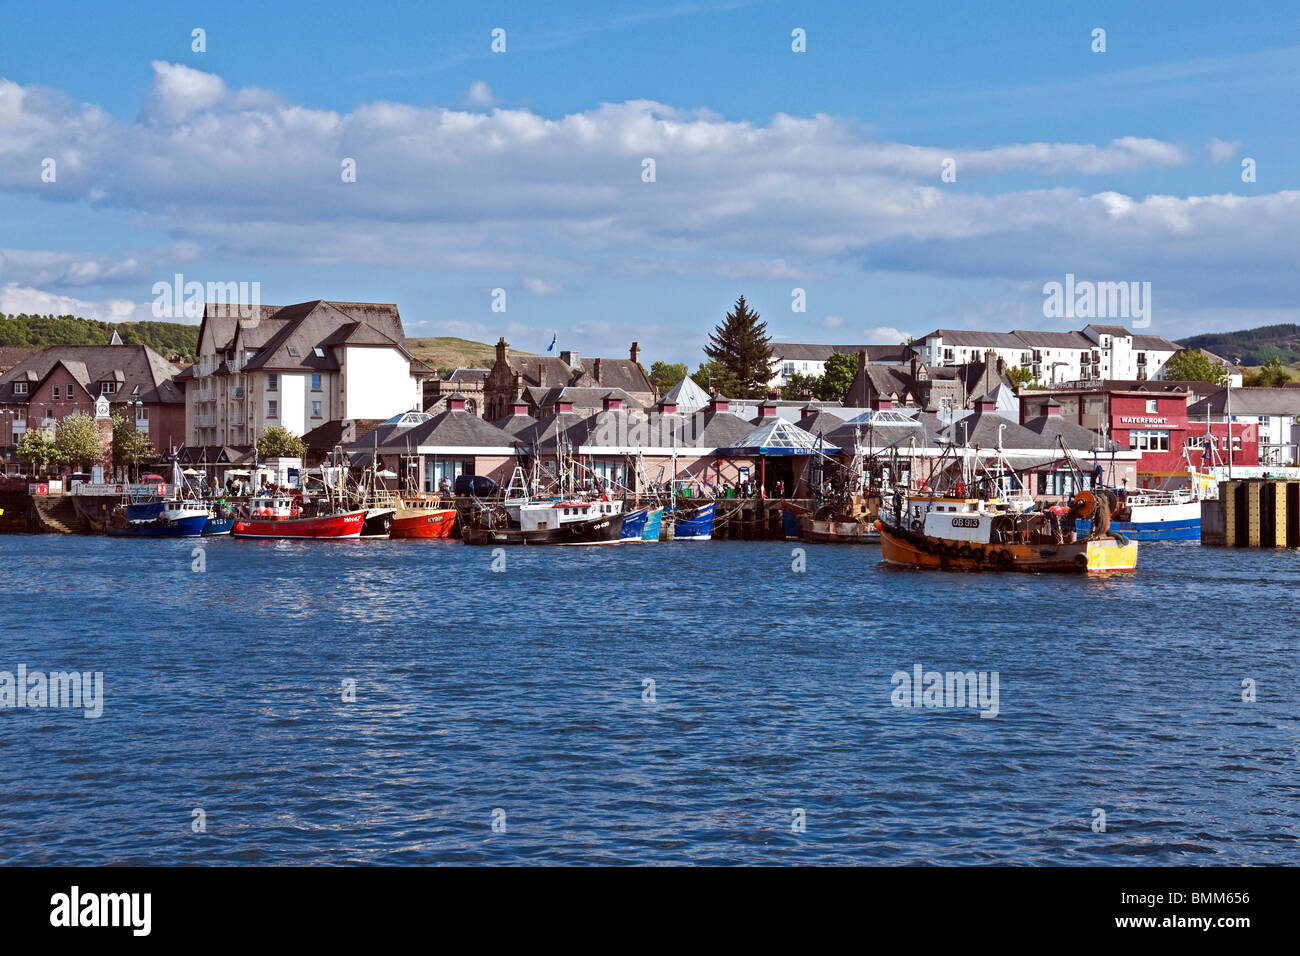 A fishing boat is arriving in Oban Harbour Lorn Scotland with other boats already moored along the pier. Stock Photo